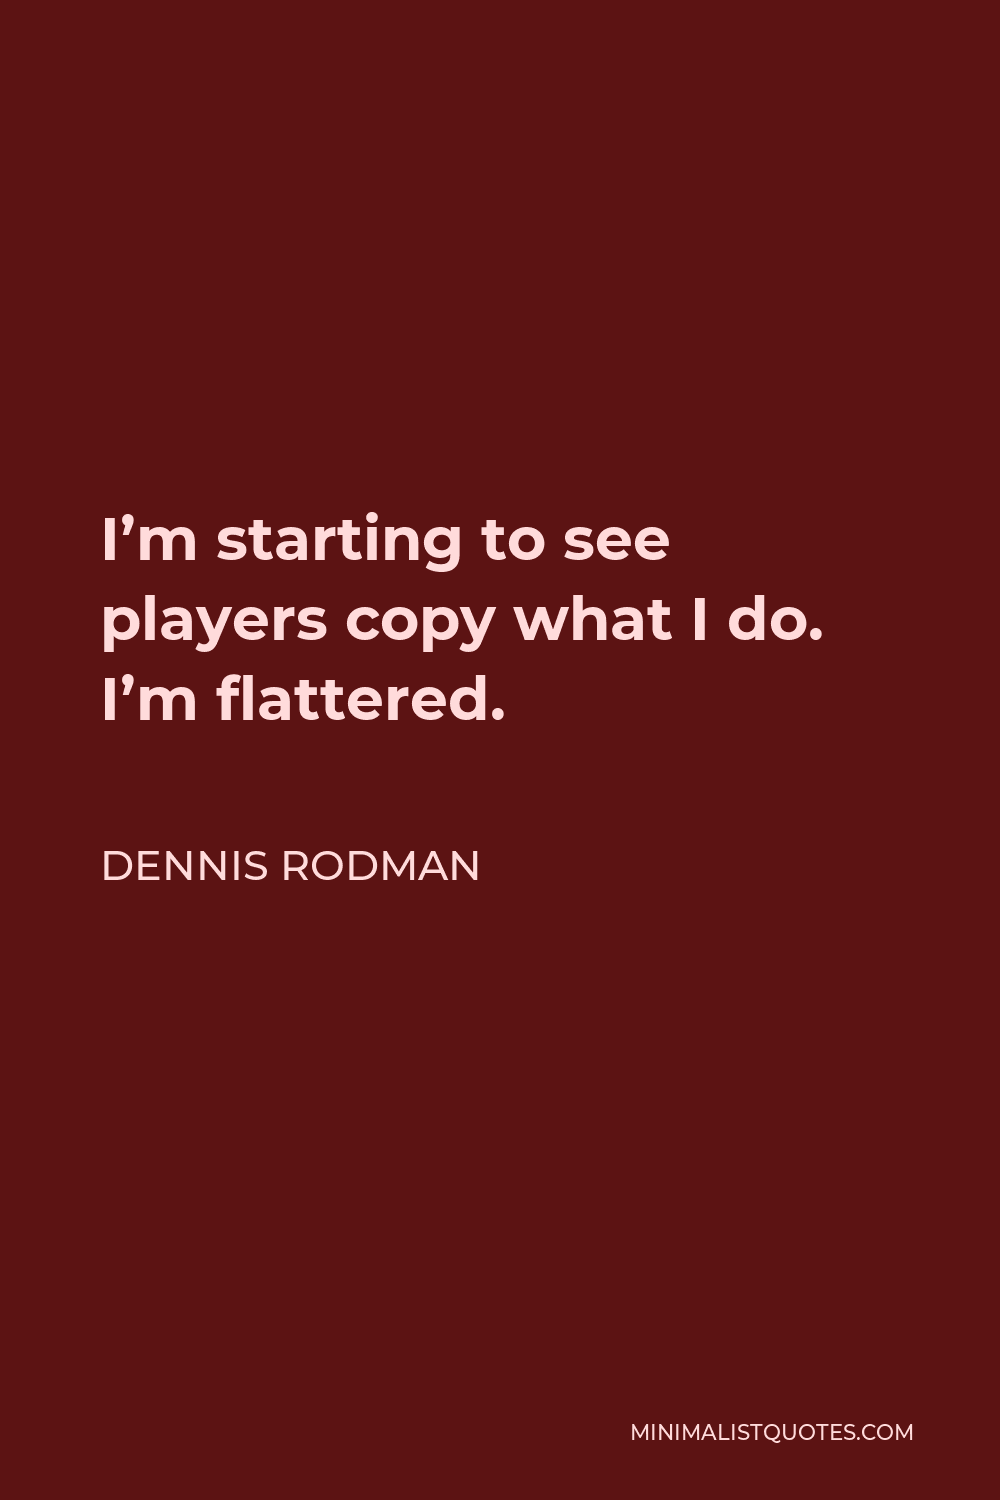 Dennis Rodman Quote - I’m starting to see players copy what I do. I’m flattered.